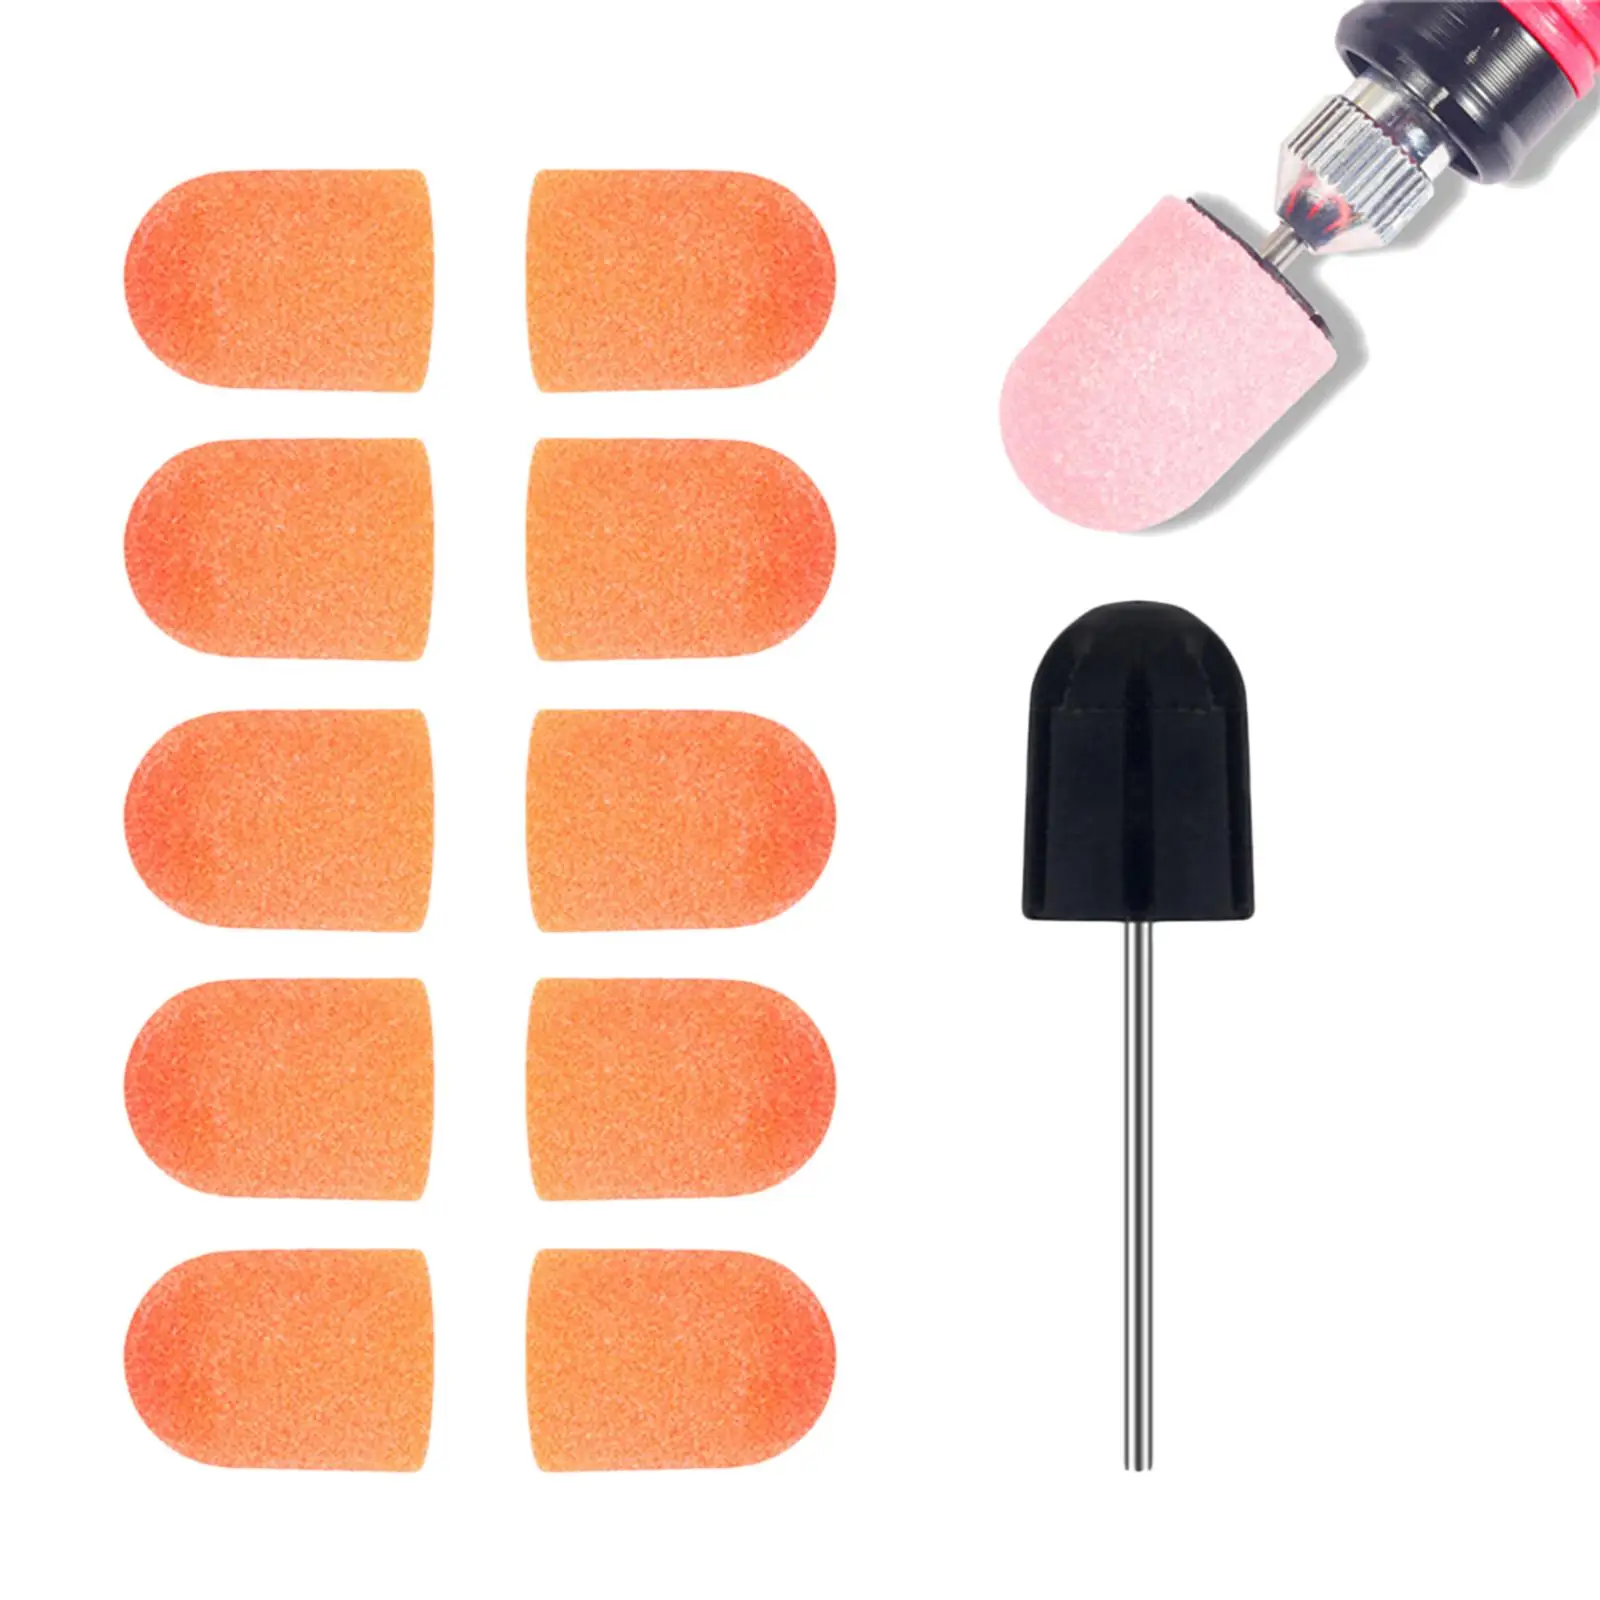 Nail Sanding Caps Bands Electric Drill Tools Drill Accessories for Salon